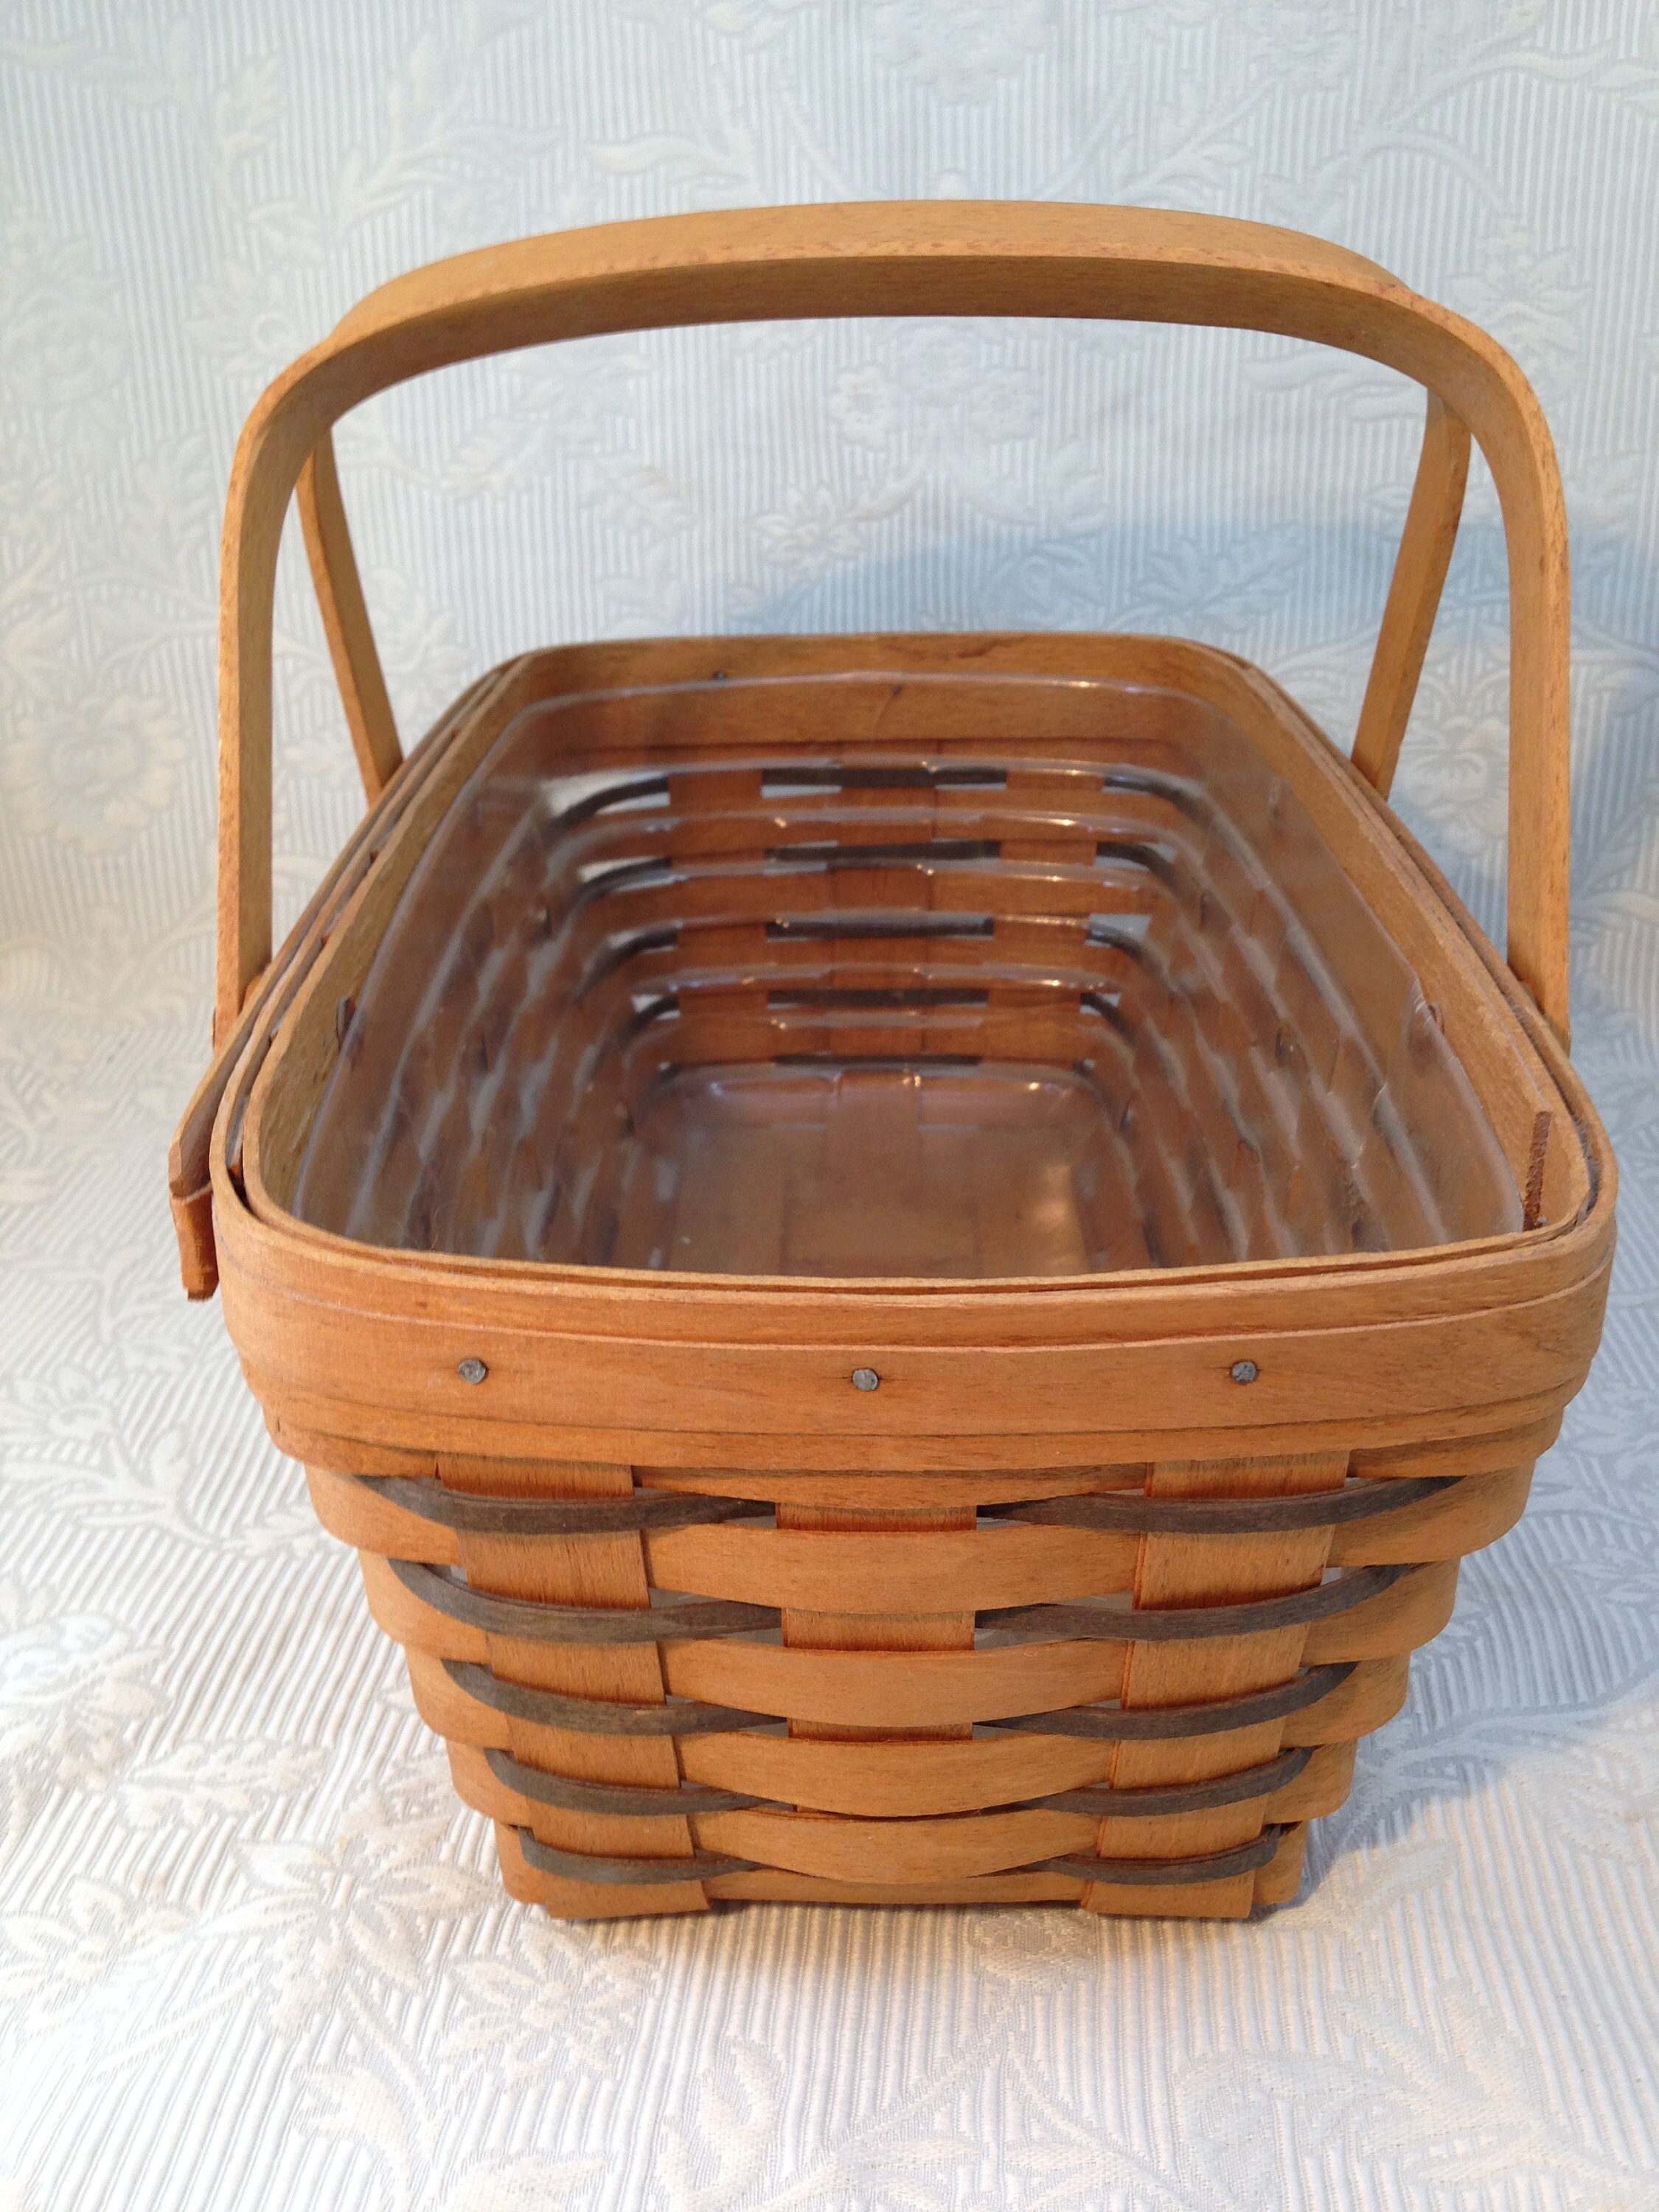 Set of 2 Longaberger Bayberry Baskets With Handles, 9 X 4 1/4 and 6 7/8 X 5  1/4 